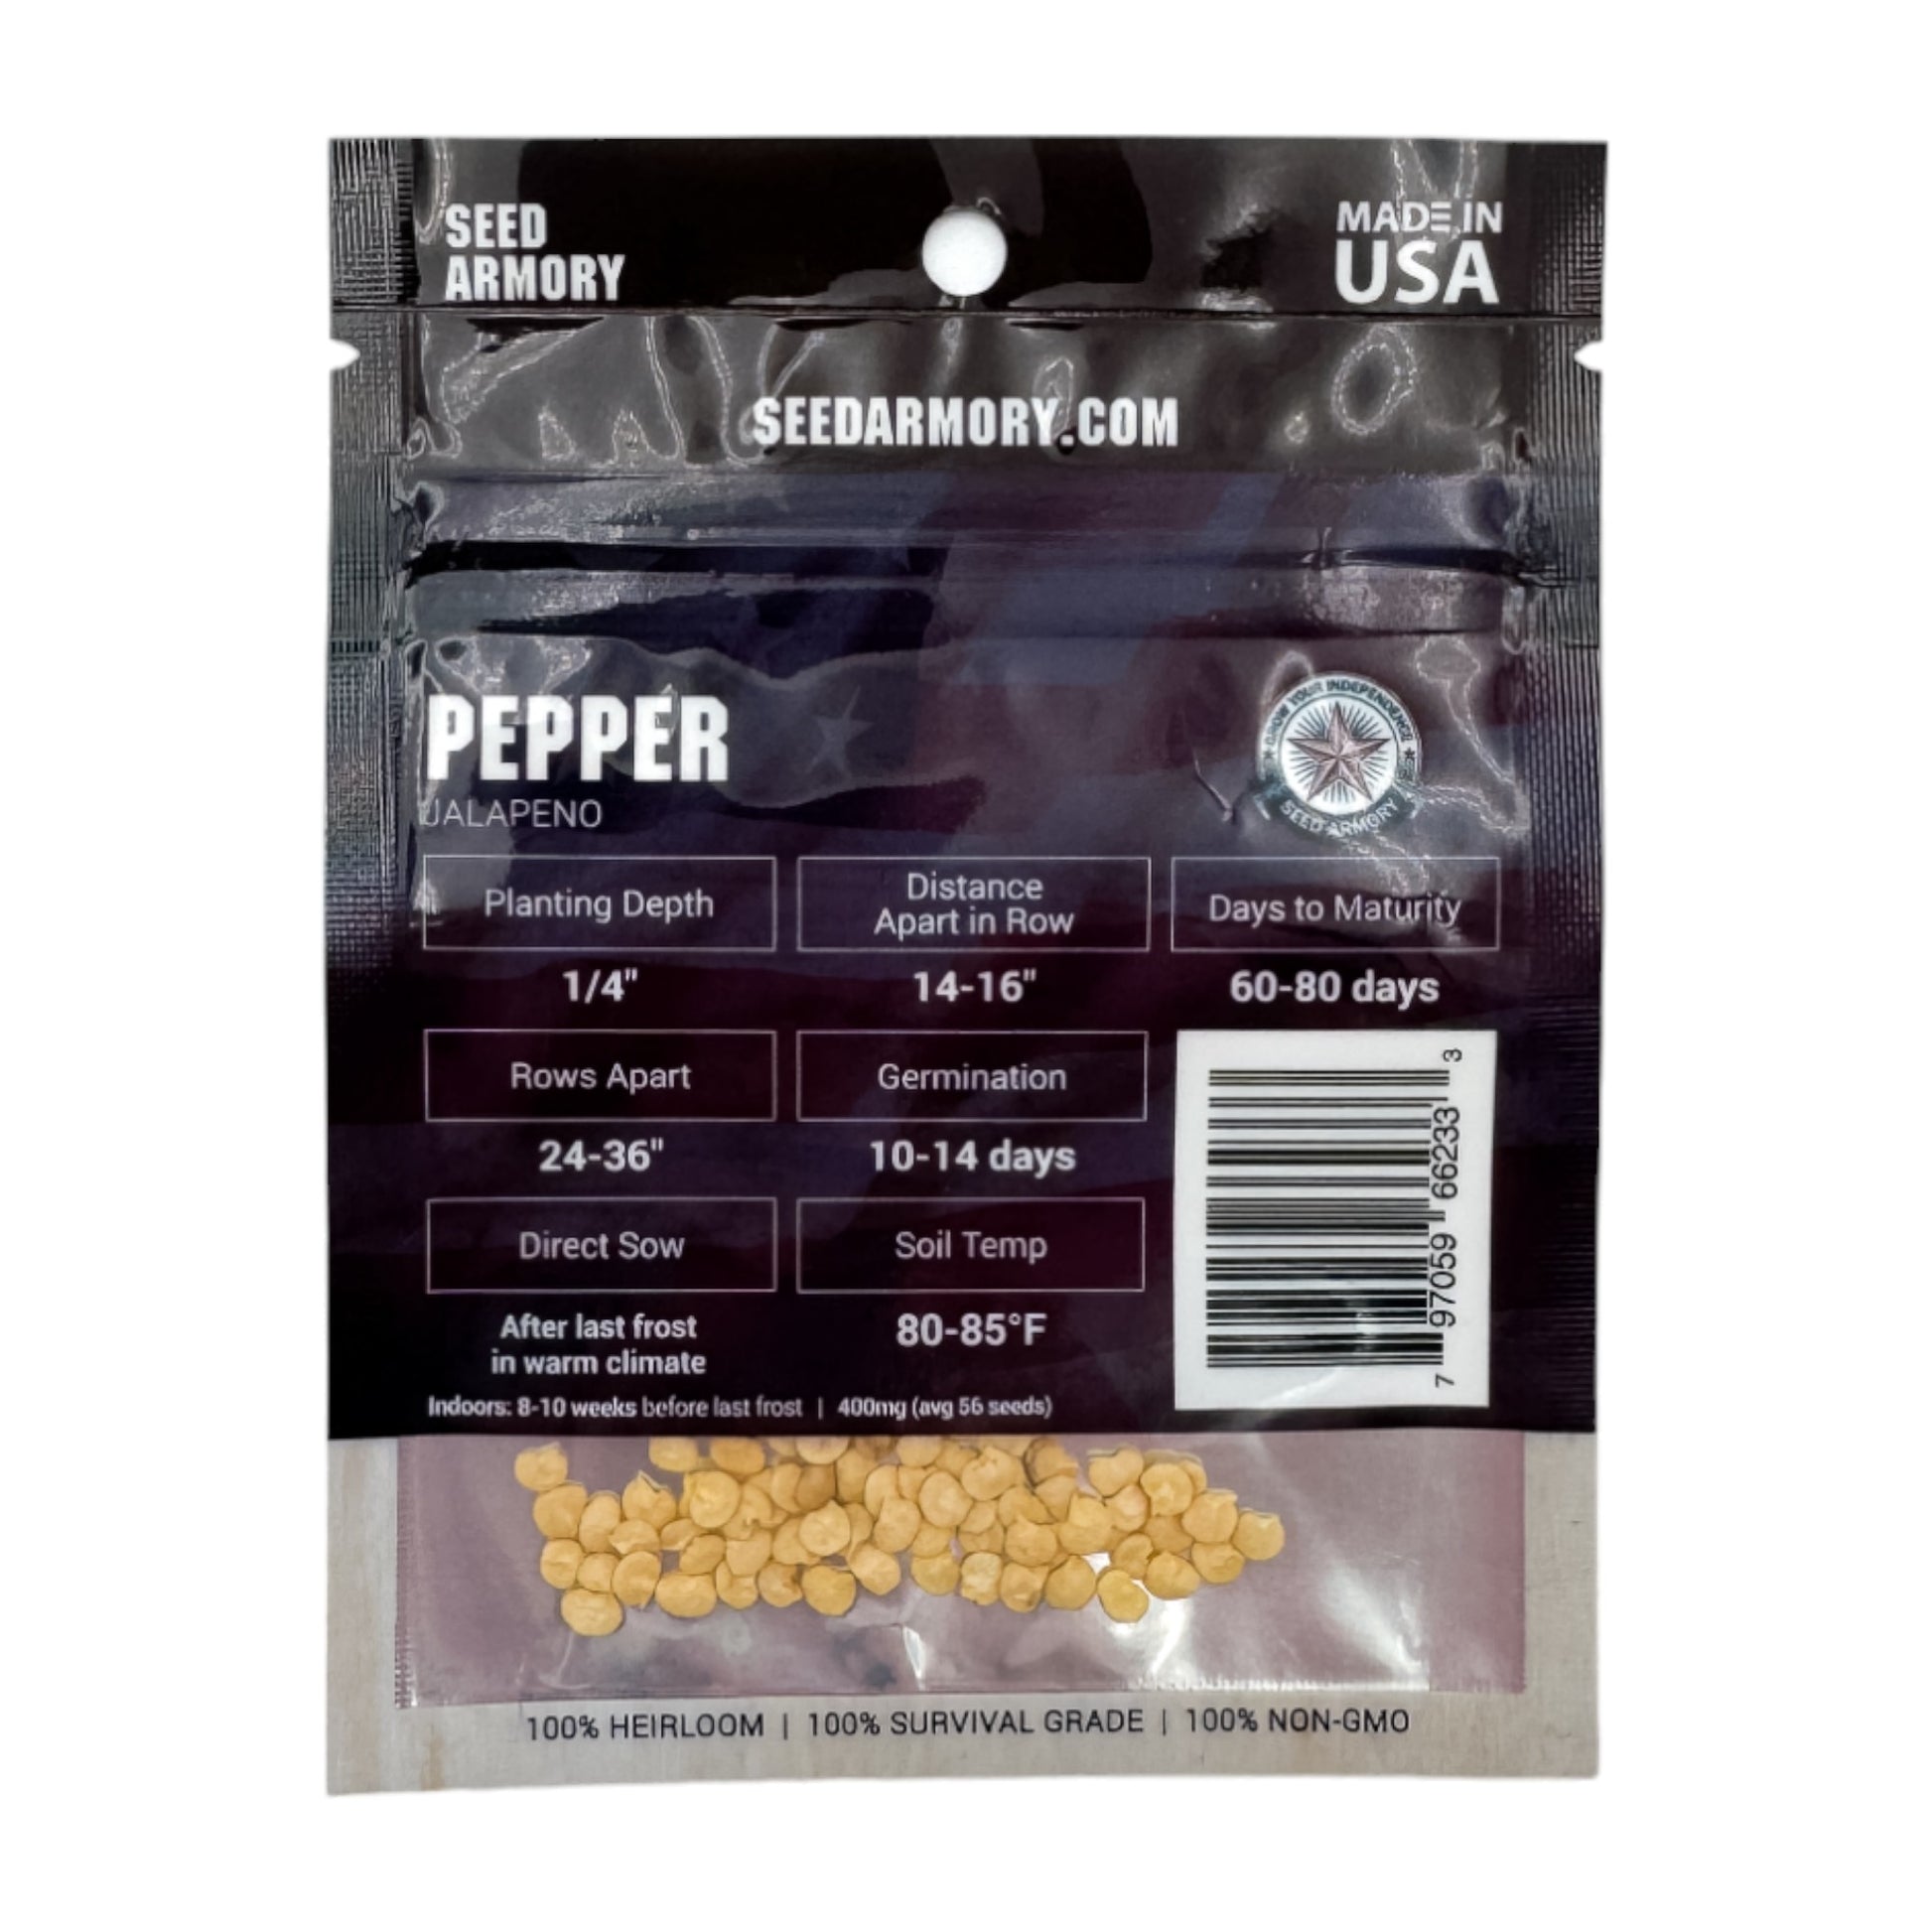 Reverese packet of Heirloom Jalapeno Pepper seeds with planting instructions